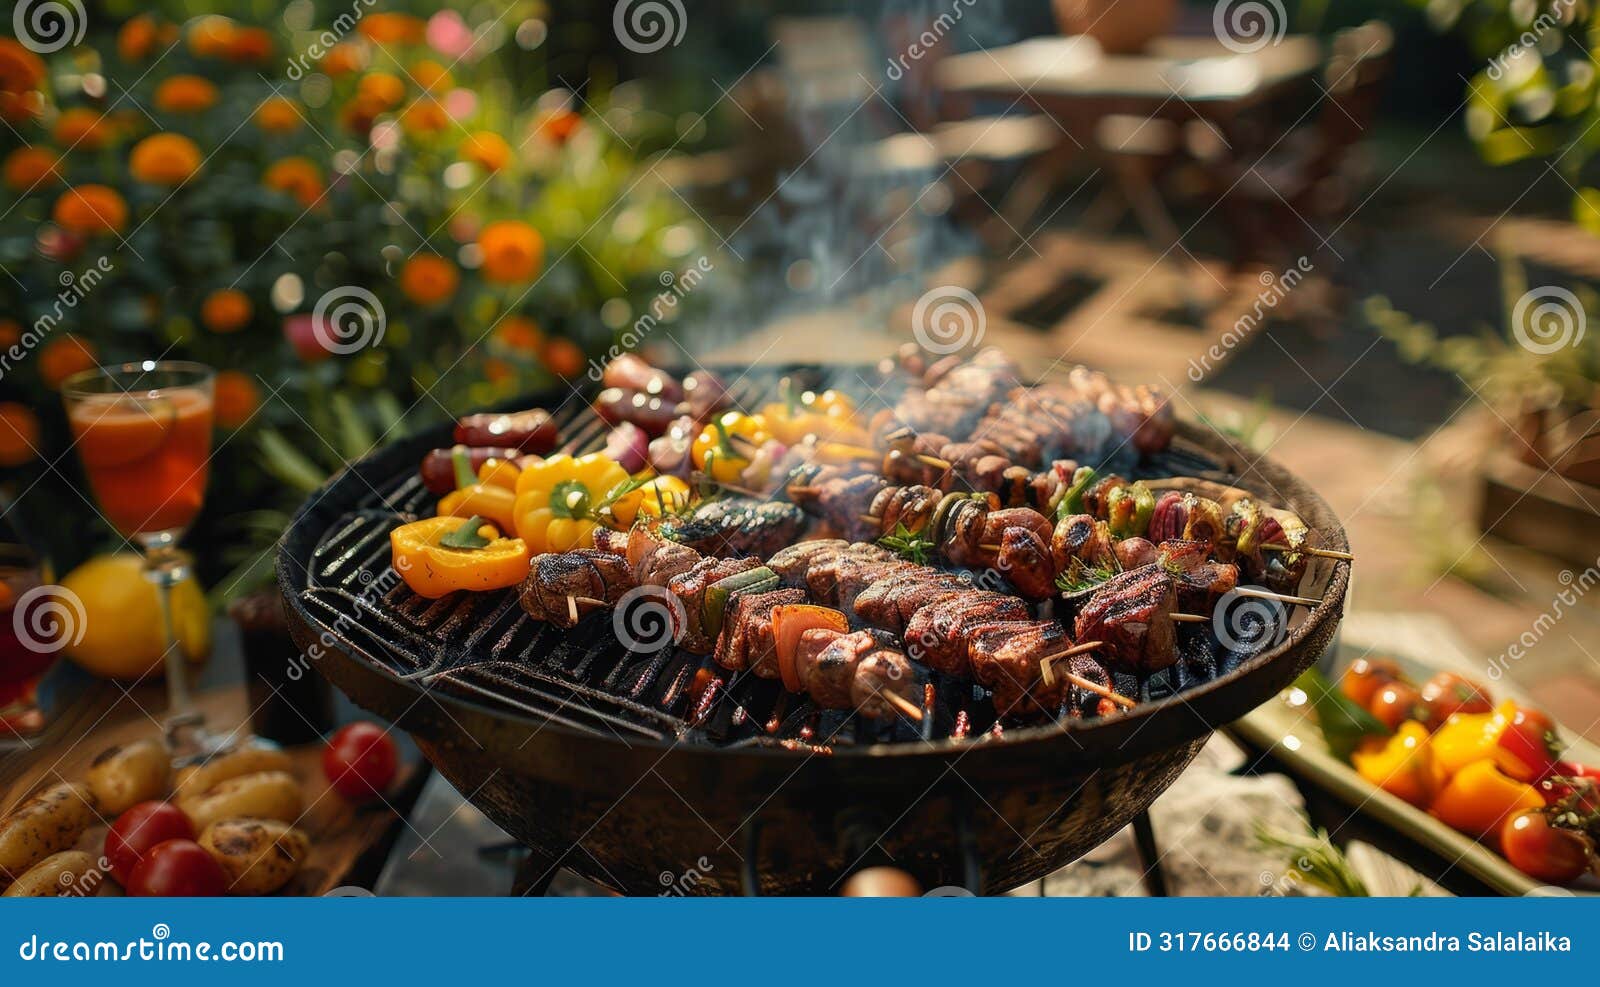 backyard grilling, the grill is sizzling in the backyard, tantalizing with delicious scents and promising a delightful